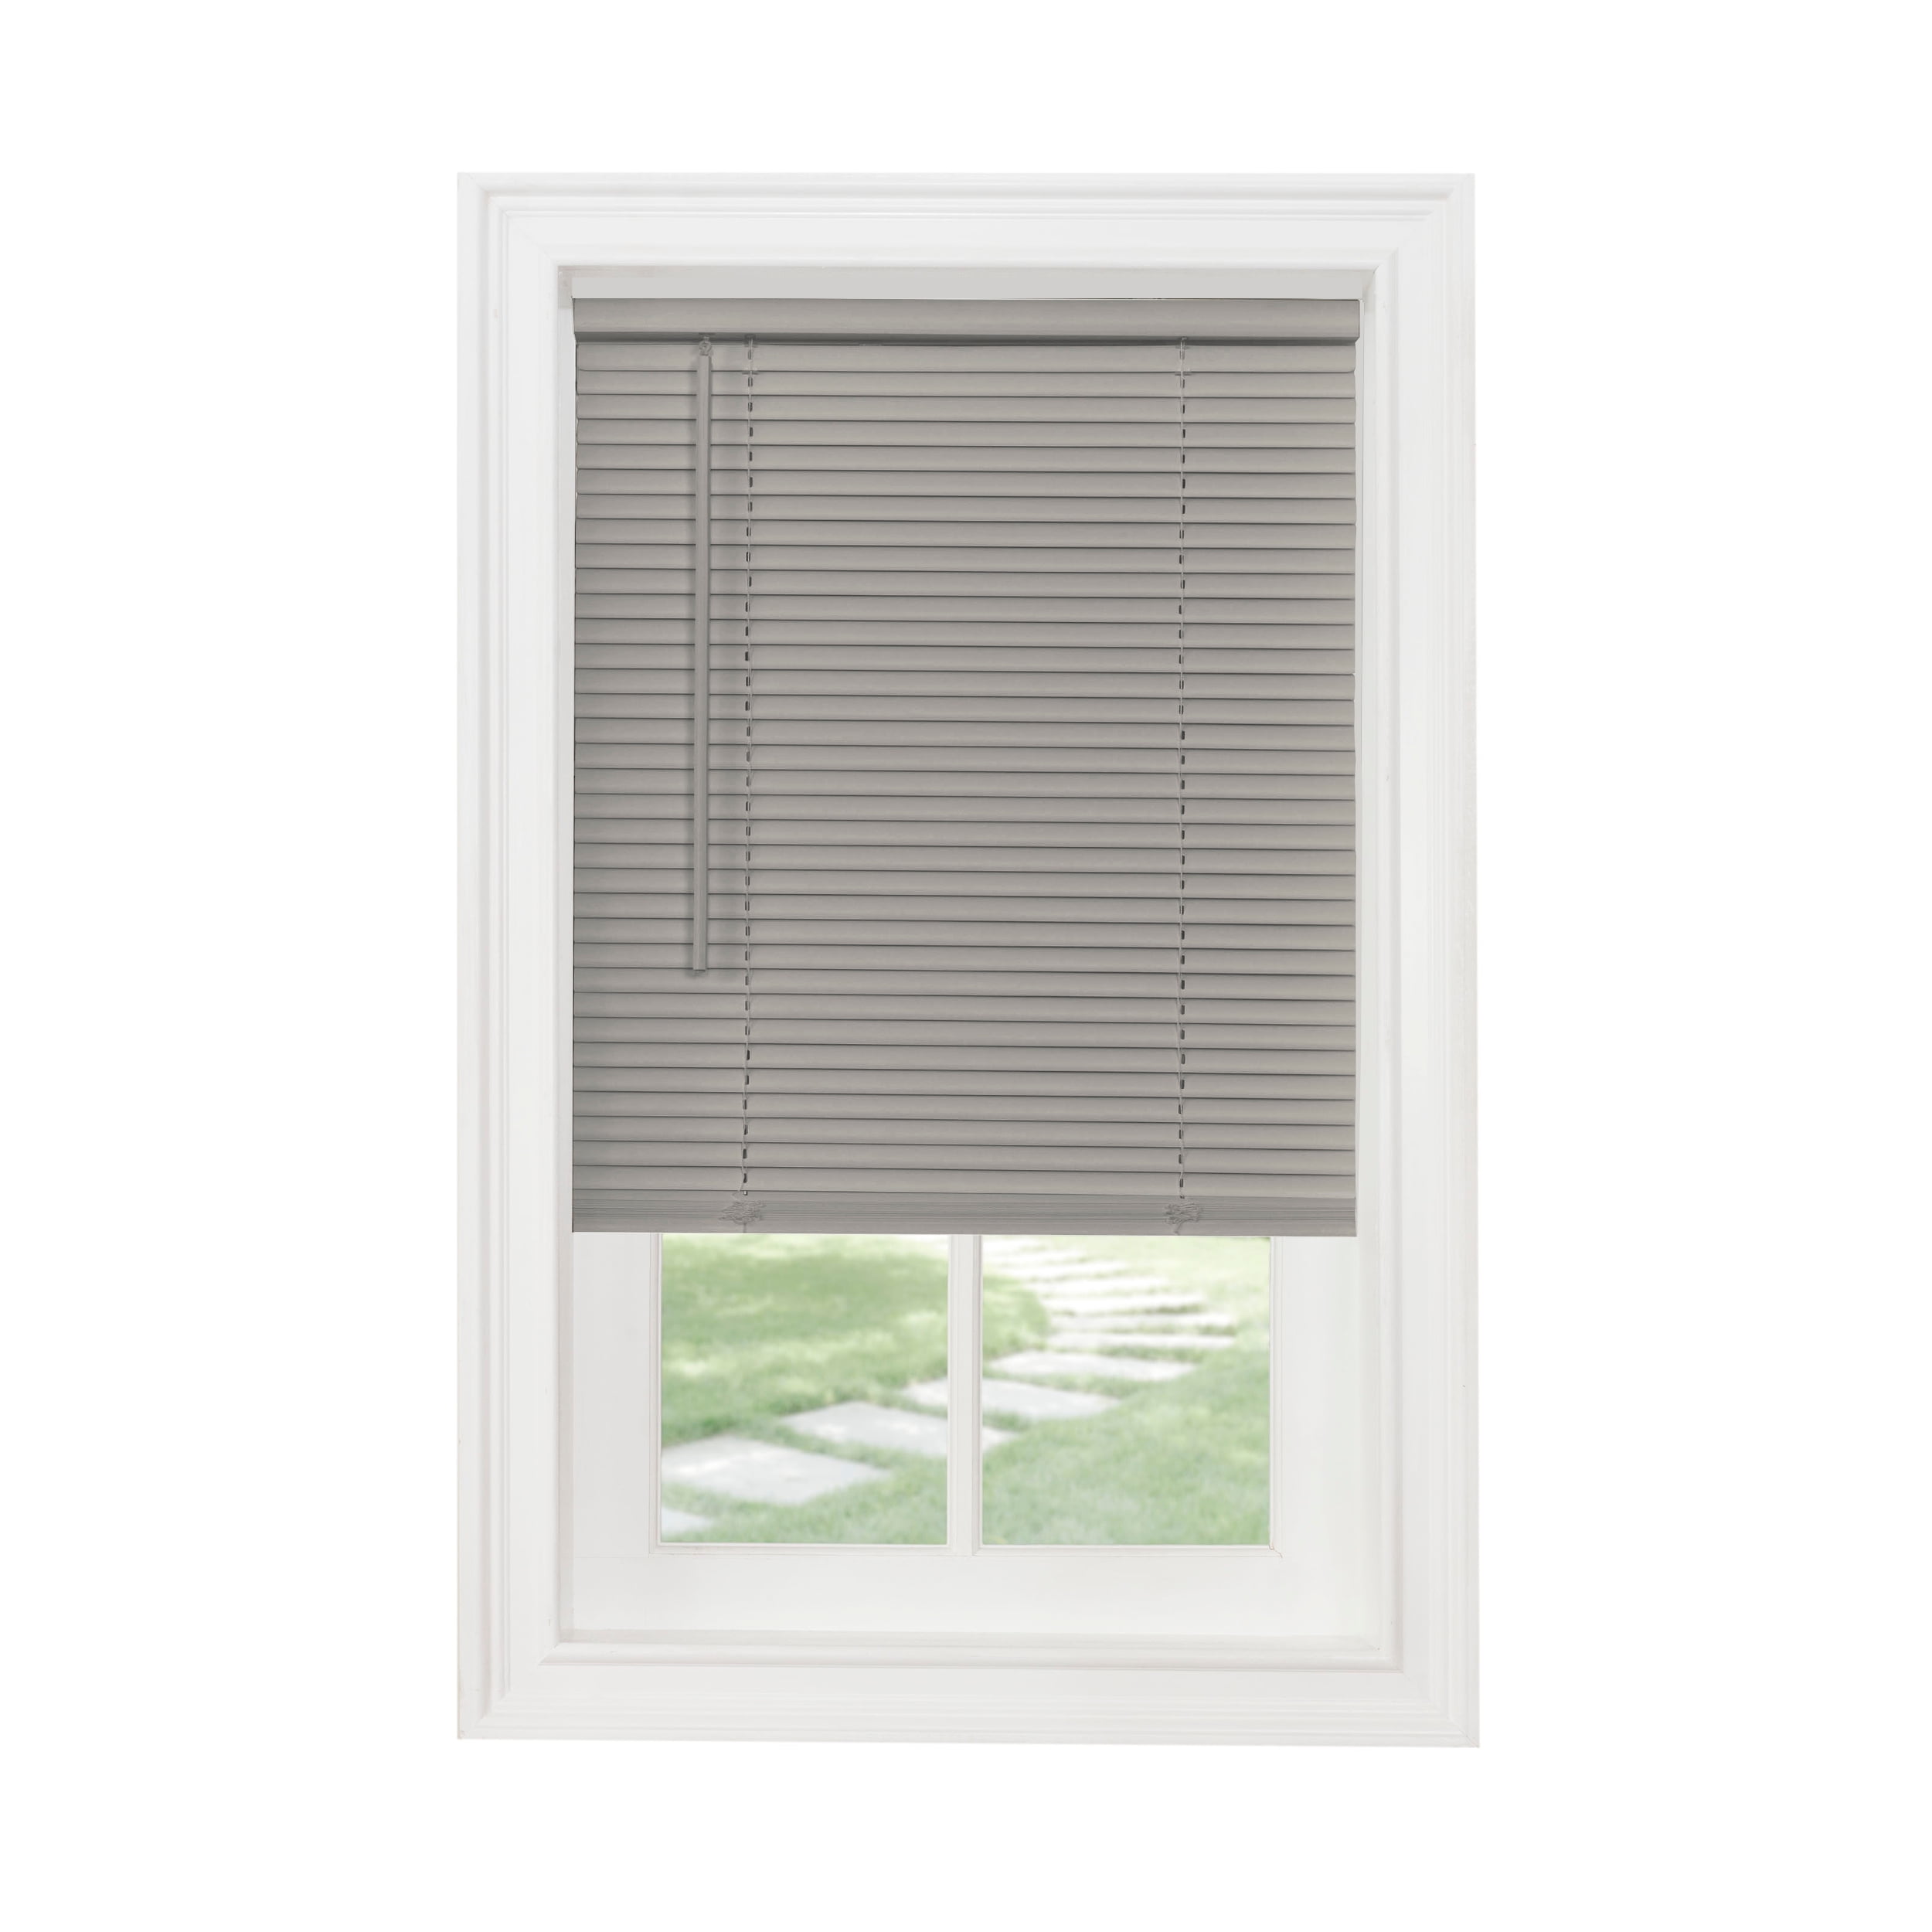 Picture of Achim MSG234GY06 34 x 64 in. GII Morningstar Cordless Light Filtering Vinyl Mini Blinds with 1 in. Slats, Grey